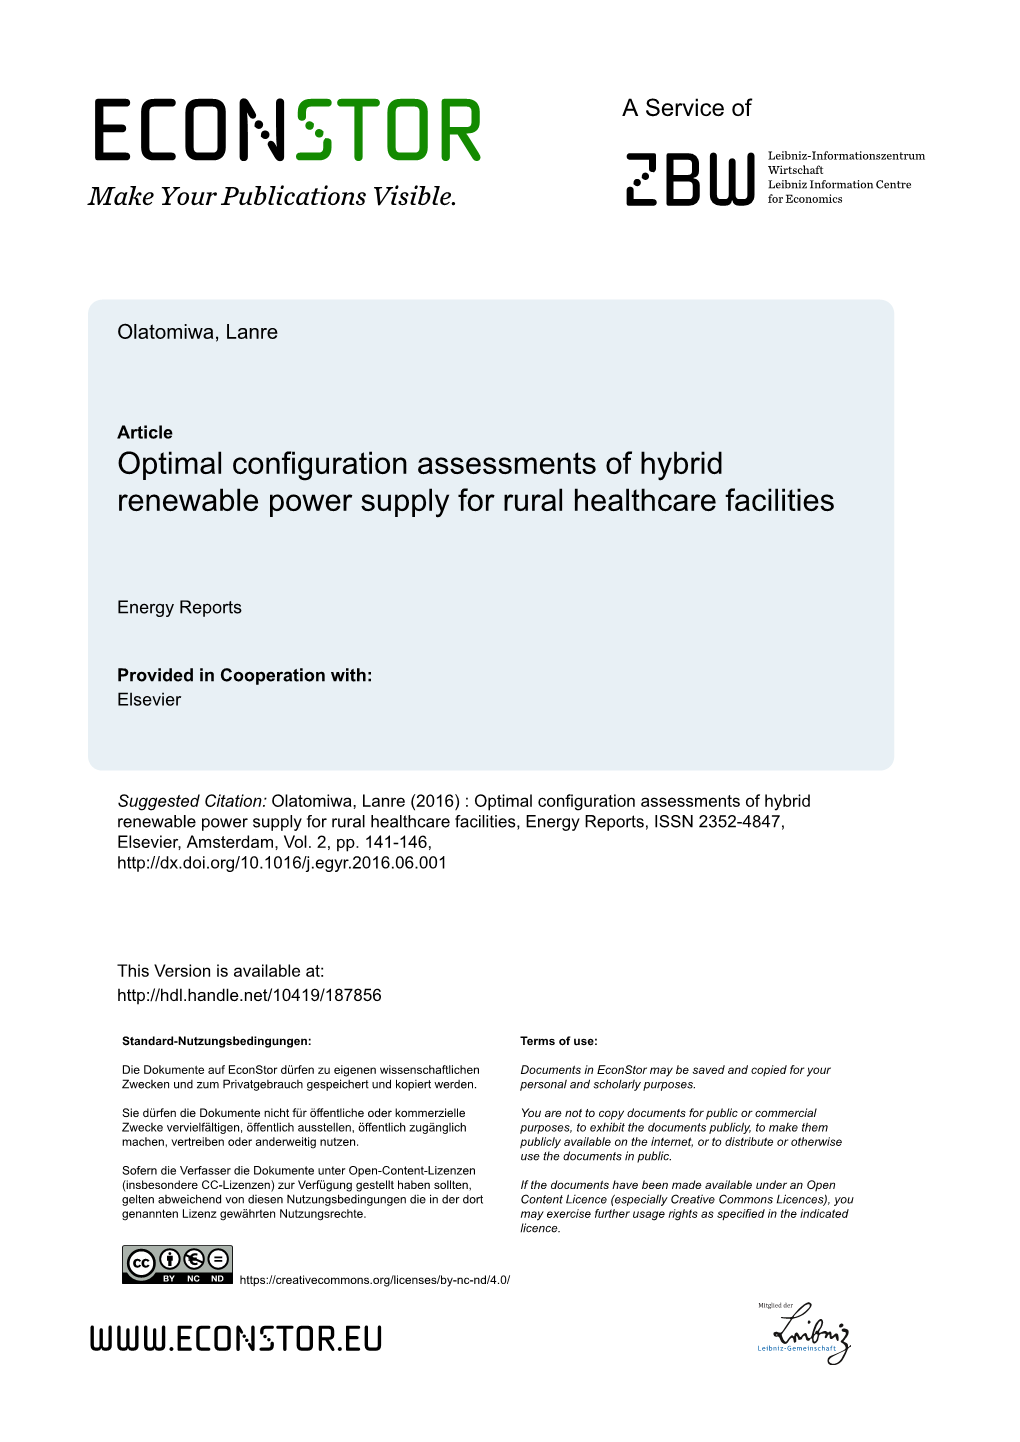 Optimal Configuration Assessments of Hybrid Renewable Power Supply for Rural Healthcare Facilities